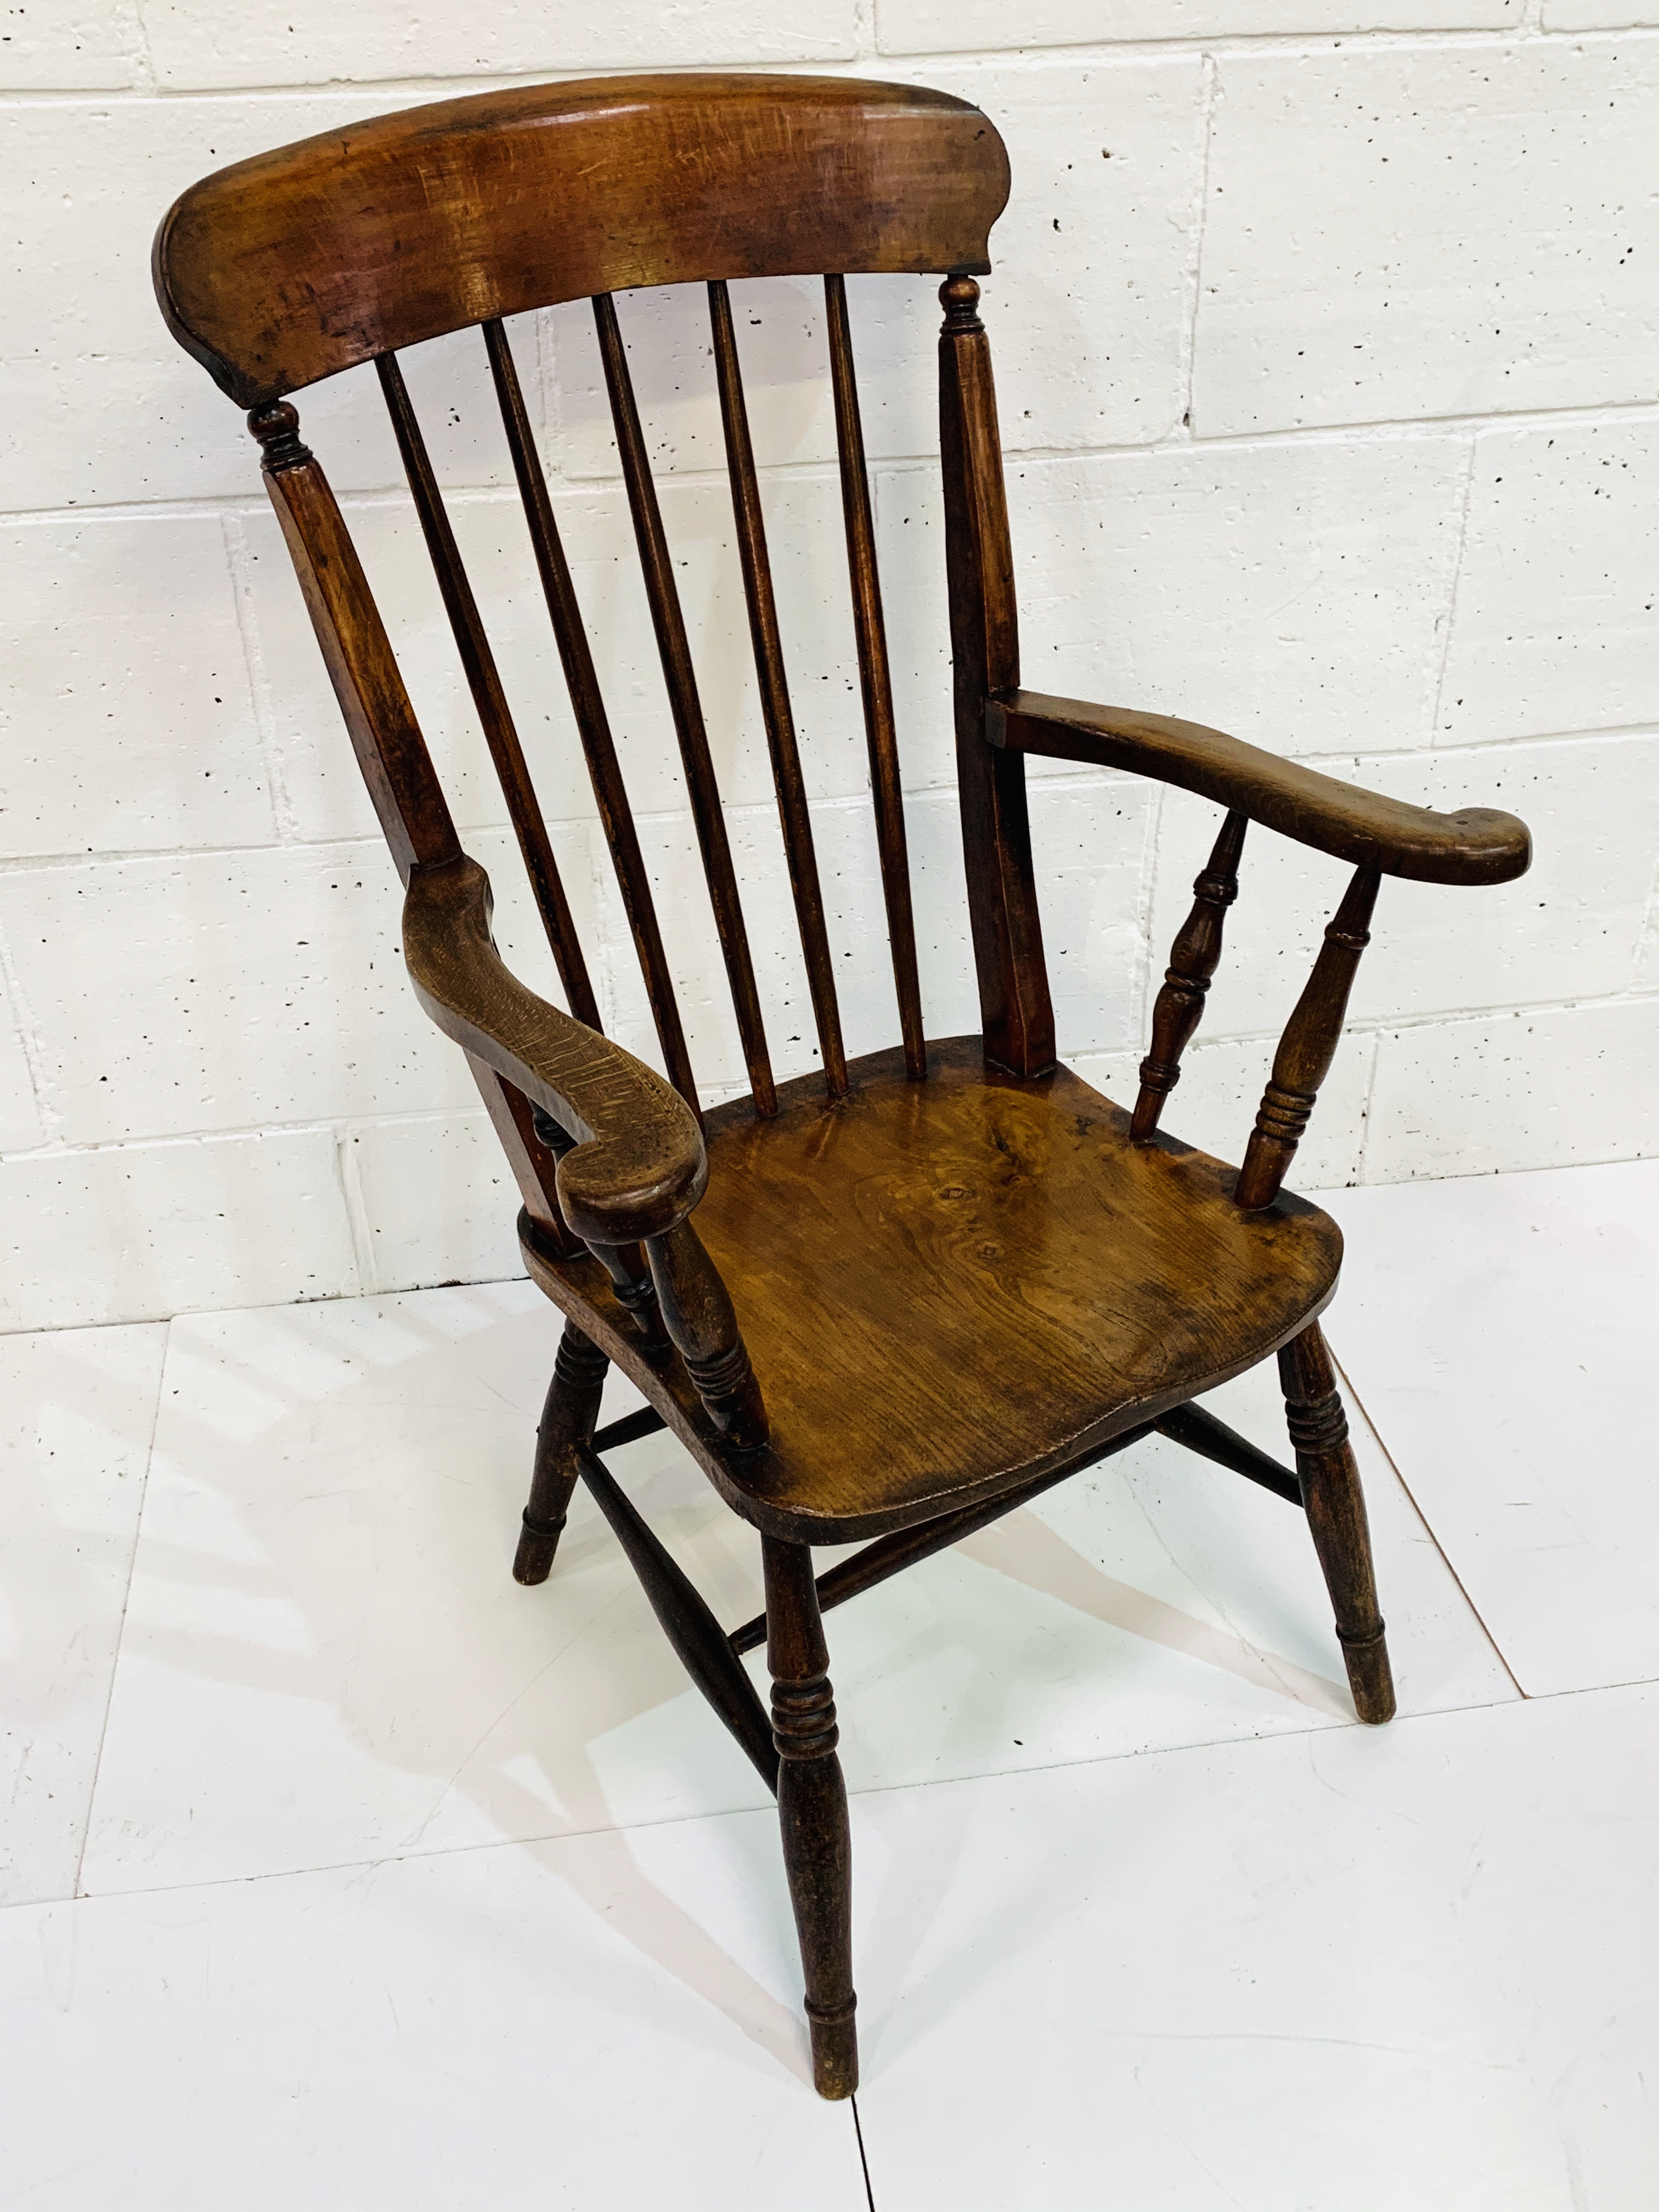 Elm seat high back farmhouse open armchair with spindle back. - Image 2 of 3